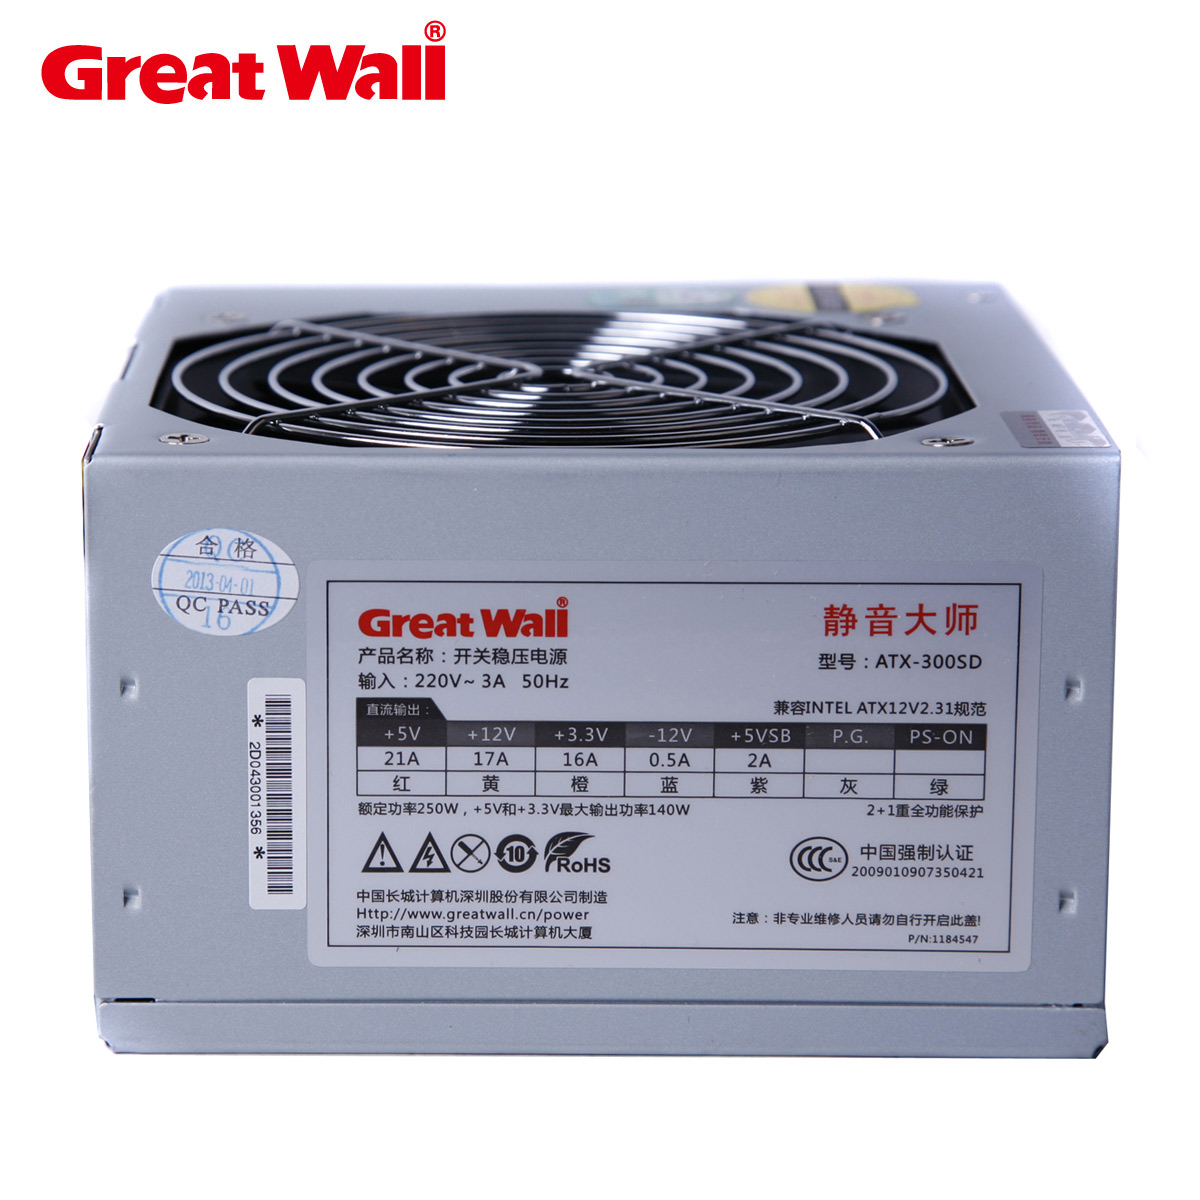 Great Wall Power Mute Master ATX-300SD rated 250W mute computer power desktop cabinet power supply